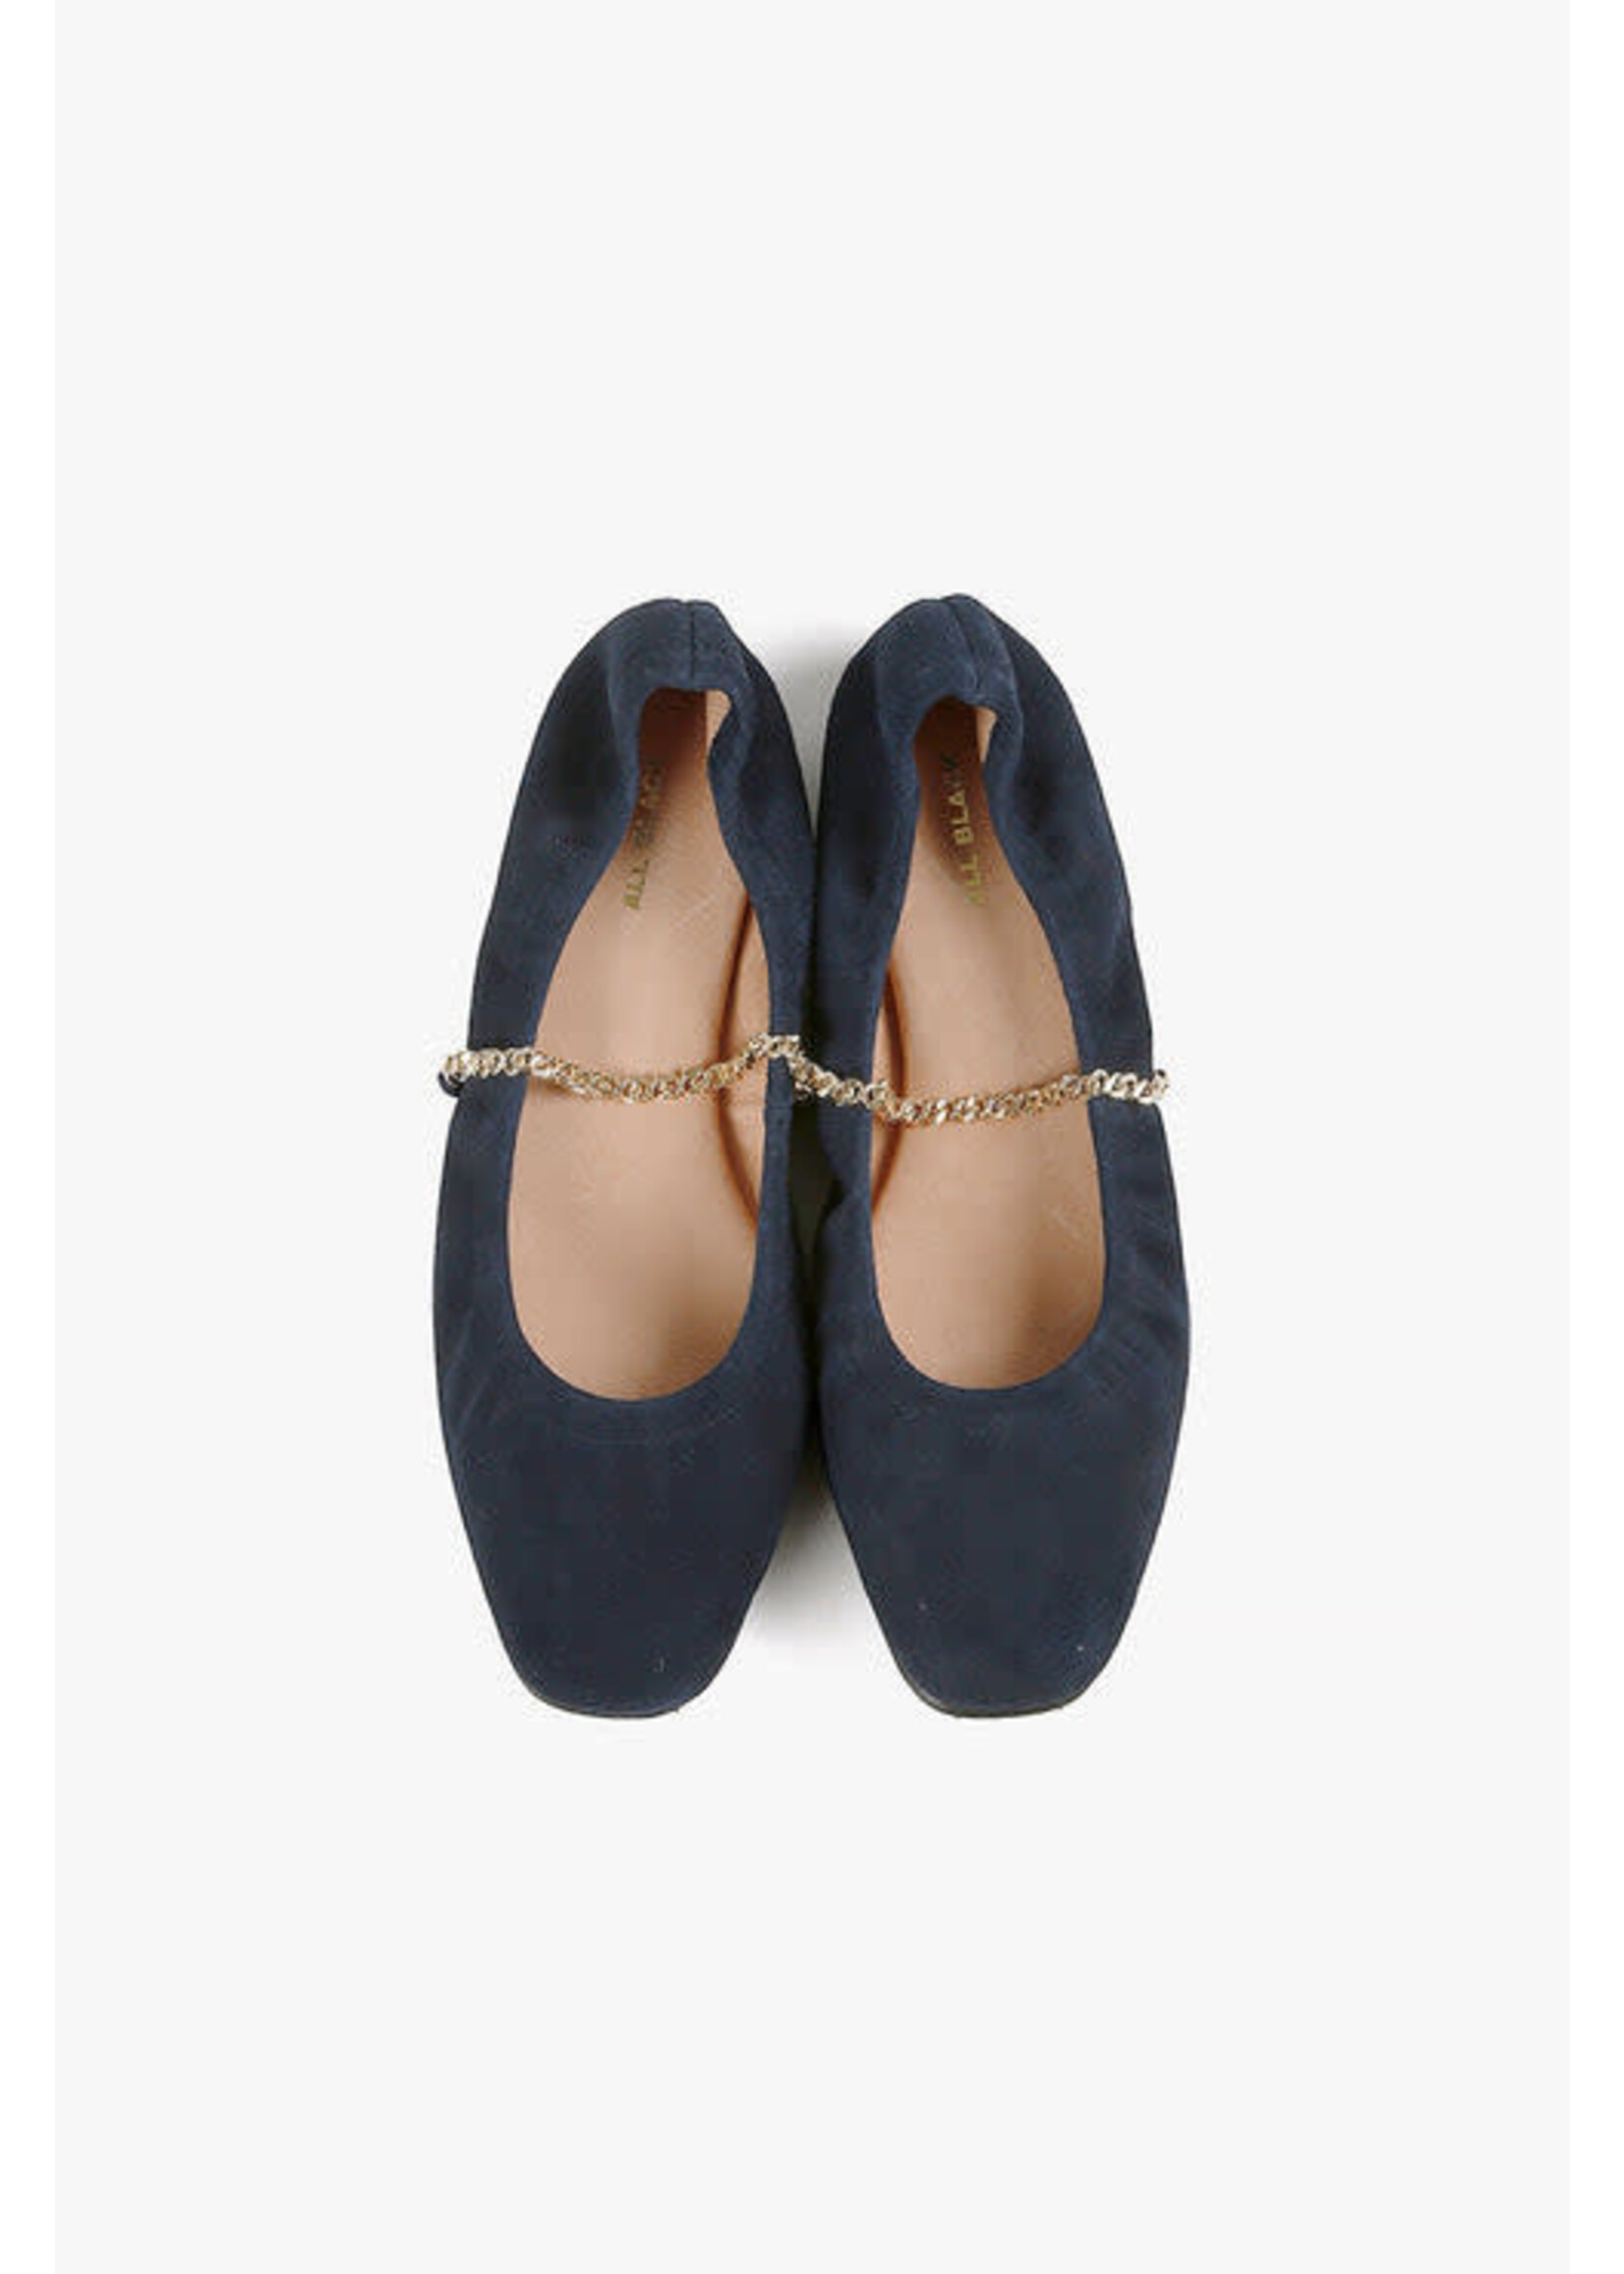 ALL BLACK Coco Ballet in Navy Kid Suede with Gold Chain by ALL BLACK  Footwear